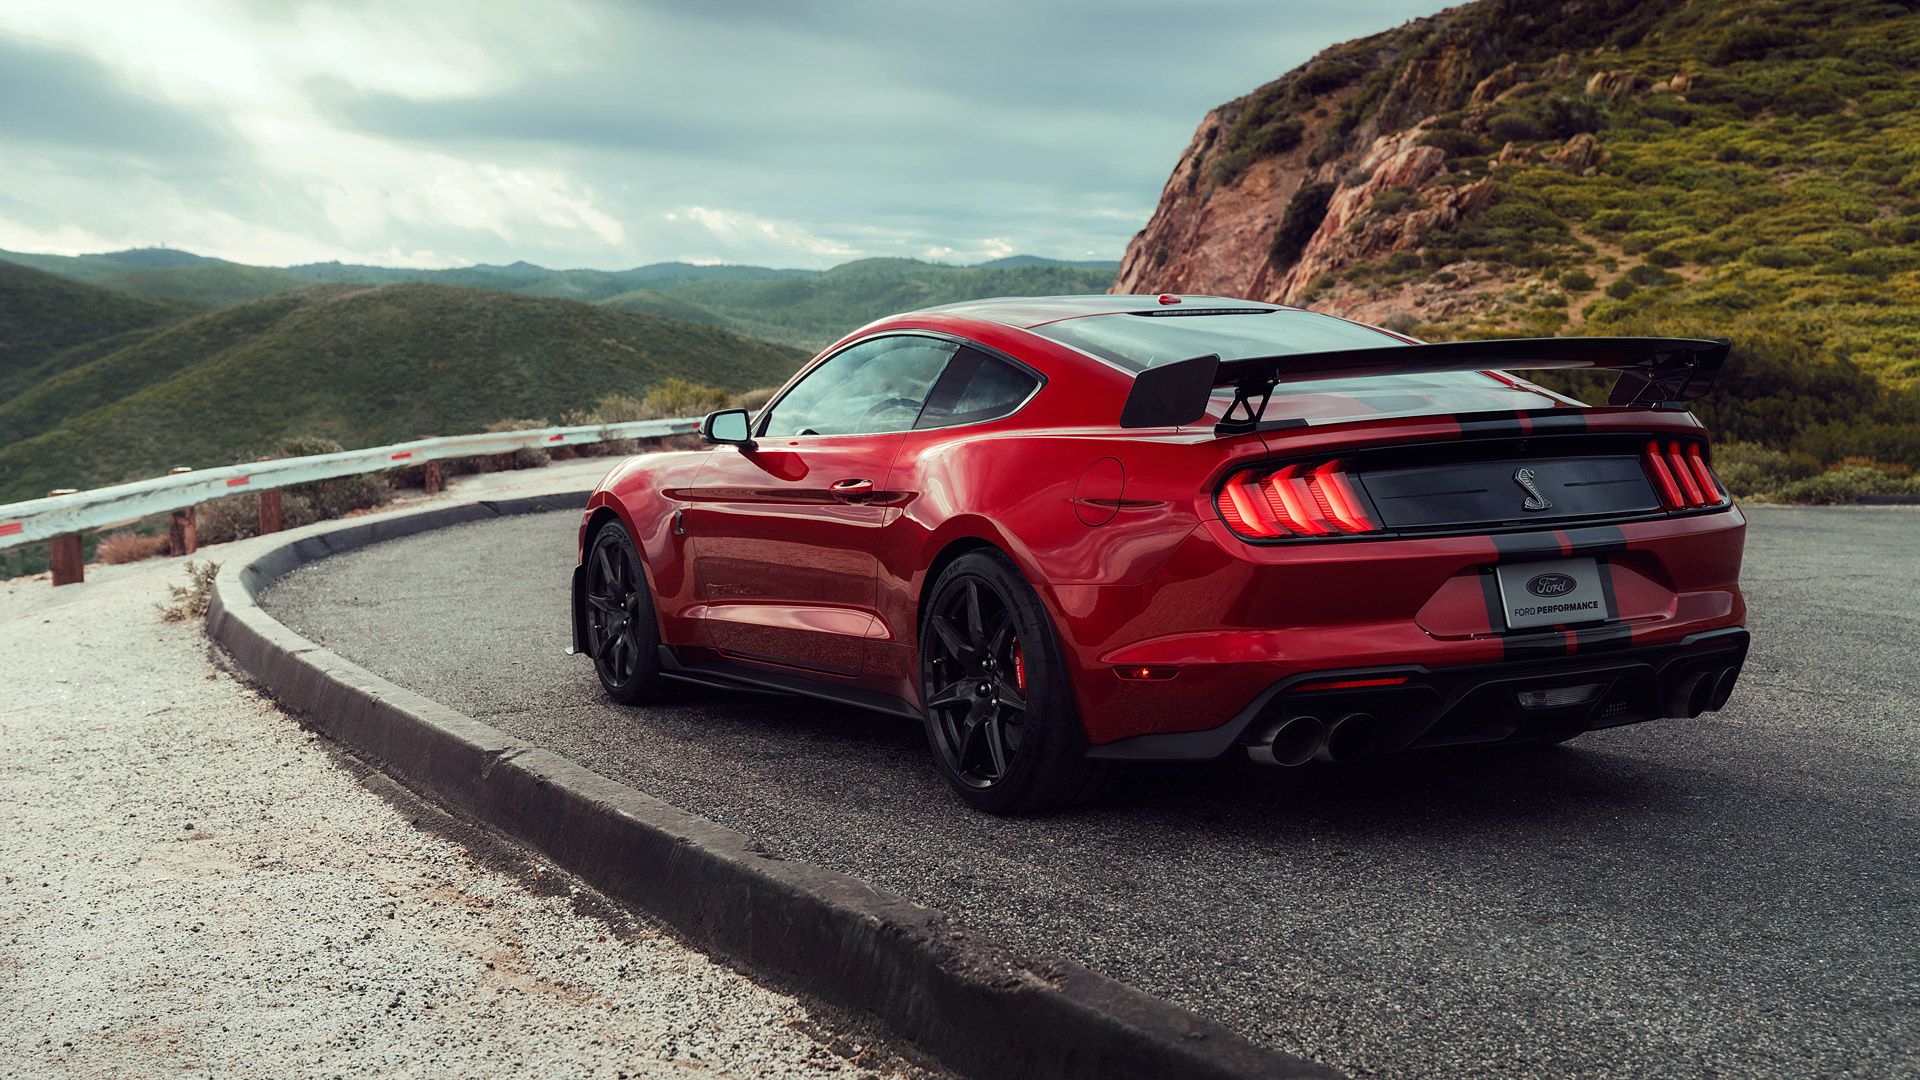 Free download 2020 Ford Mustang Shelby GT500 Wallpaper Specs Videos 4K HD [1920x1080] for your Desktop, Mobile & Tablet. Explore Ford Mustang 2020 Wallpaper. Ford Mustang 2020 Wallpaper, Ford Mustang Wallpaper, Ford Mustang Background